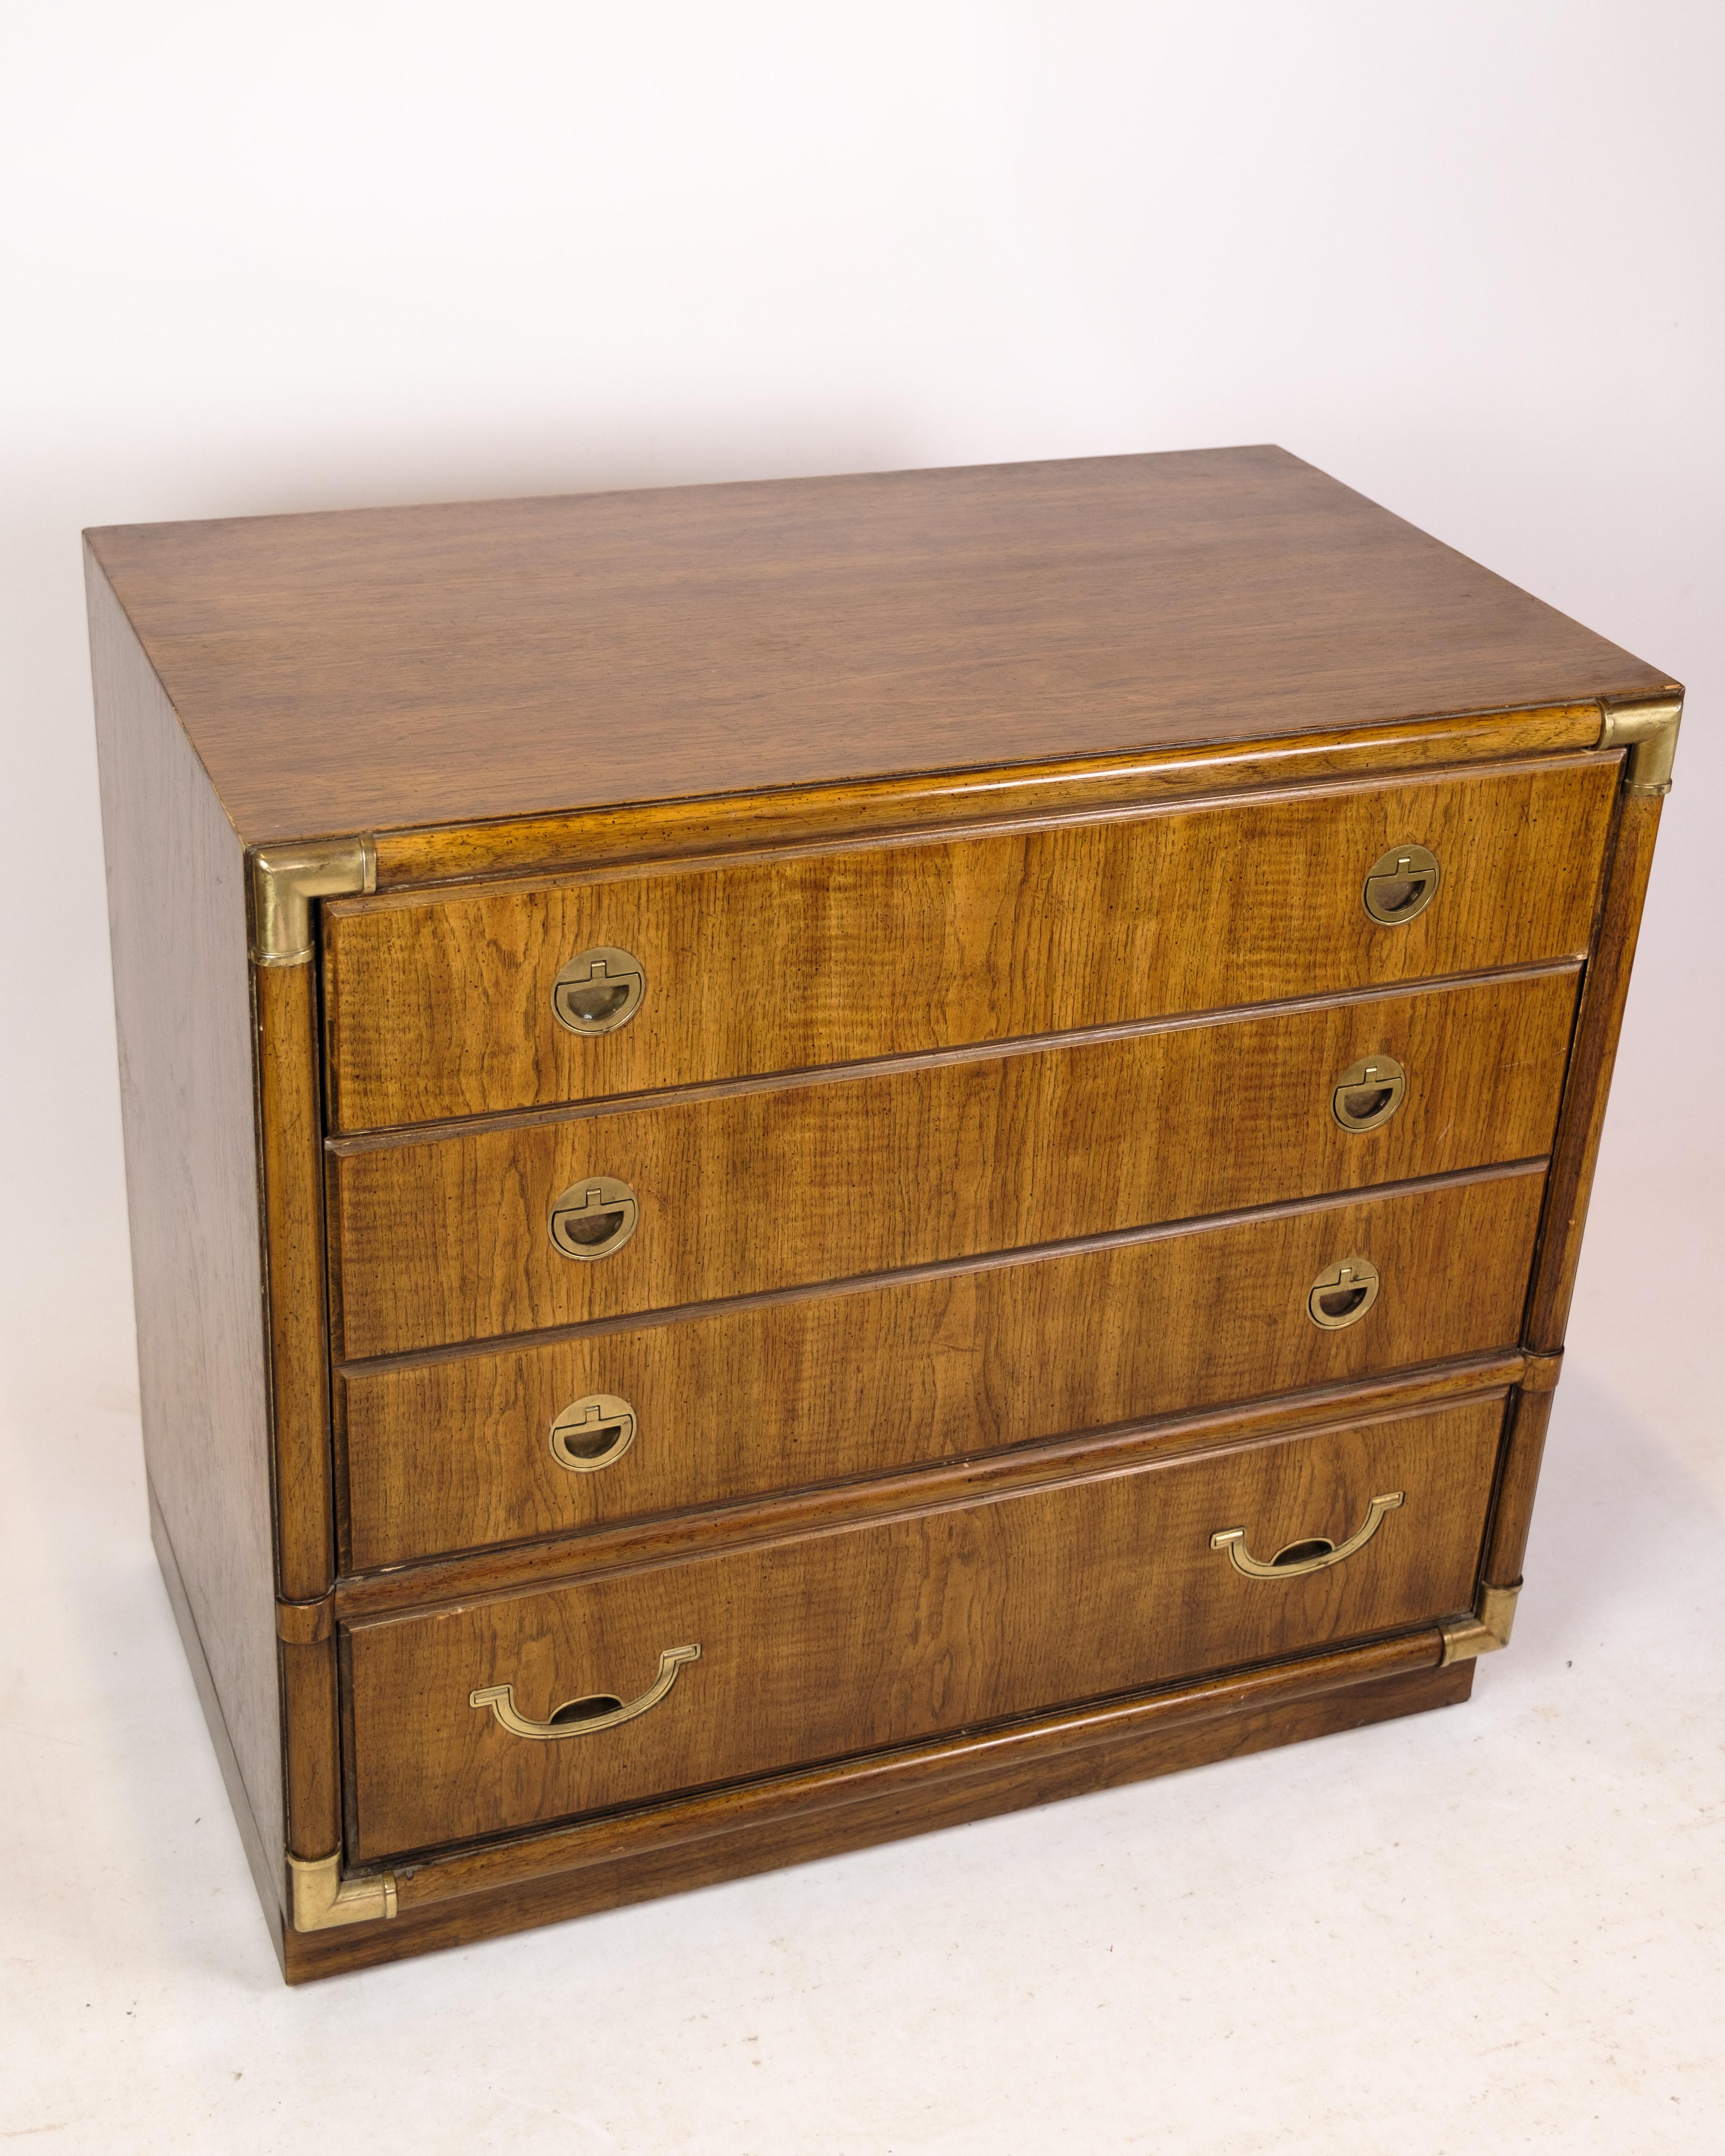 Mahogany Chest of drawers with 4 drawers and brass fittings from the 1920s For Sale